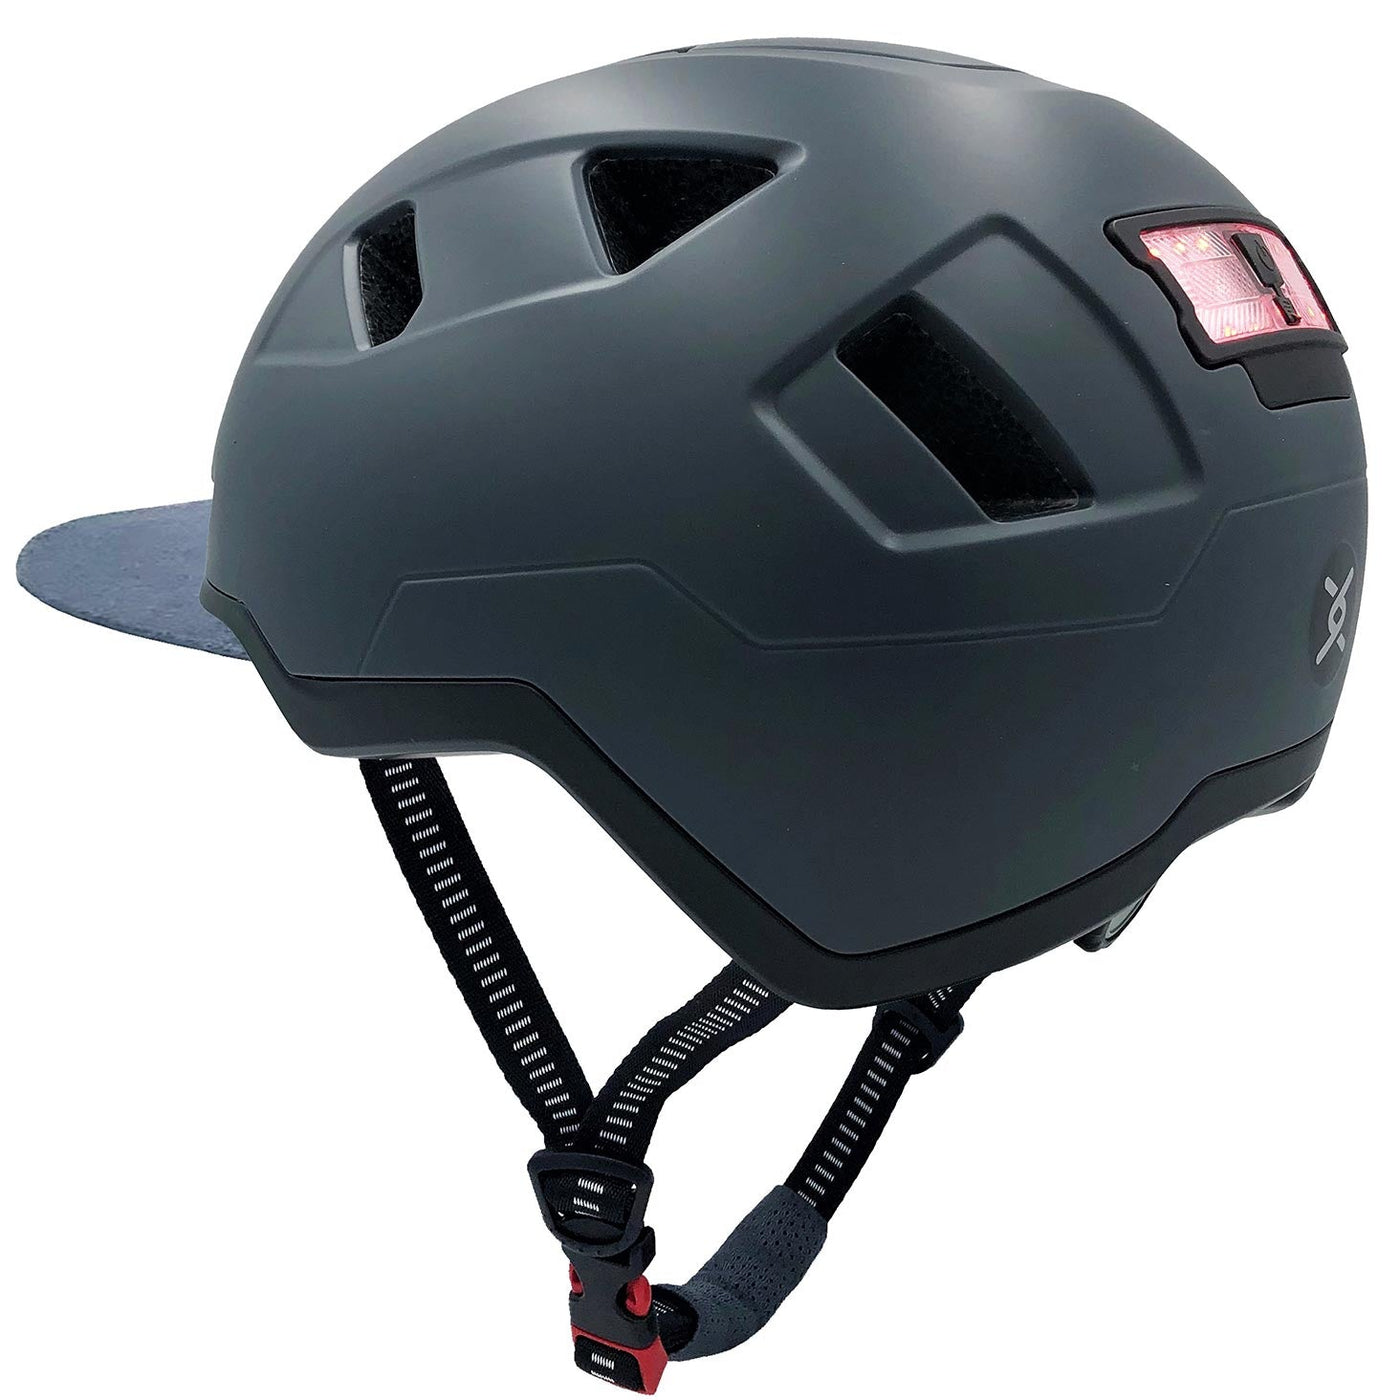 urban xnito helmet with light and visor side view